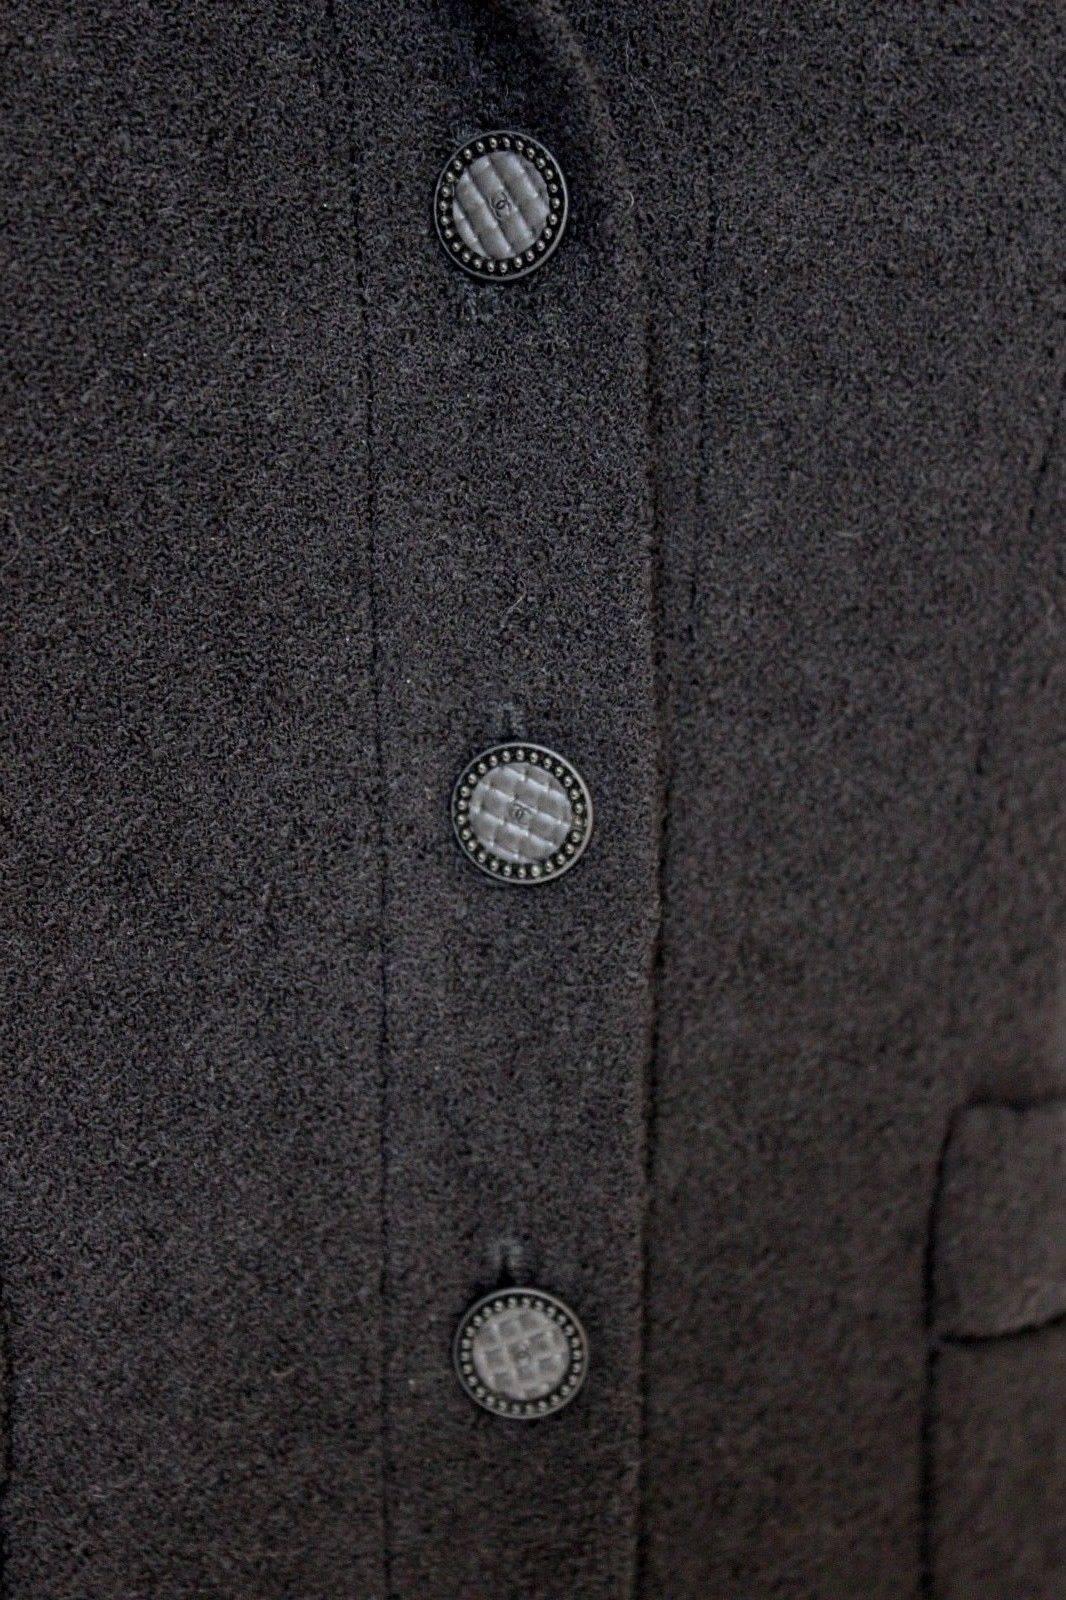 Chanel Black Classic Skirt Suit Jacket F38 uk 10  In Excellent Condition For Sale In London, GB